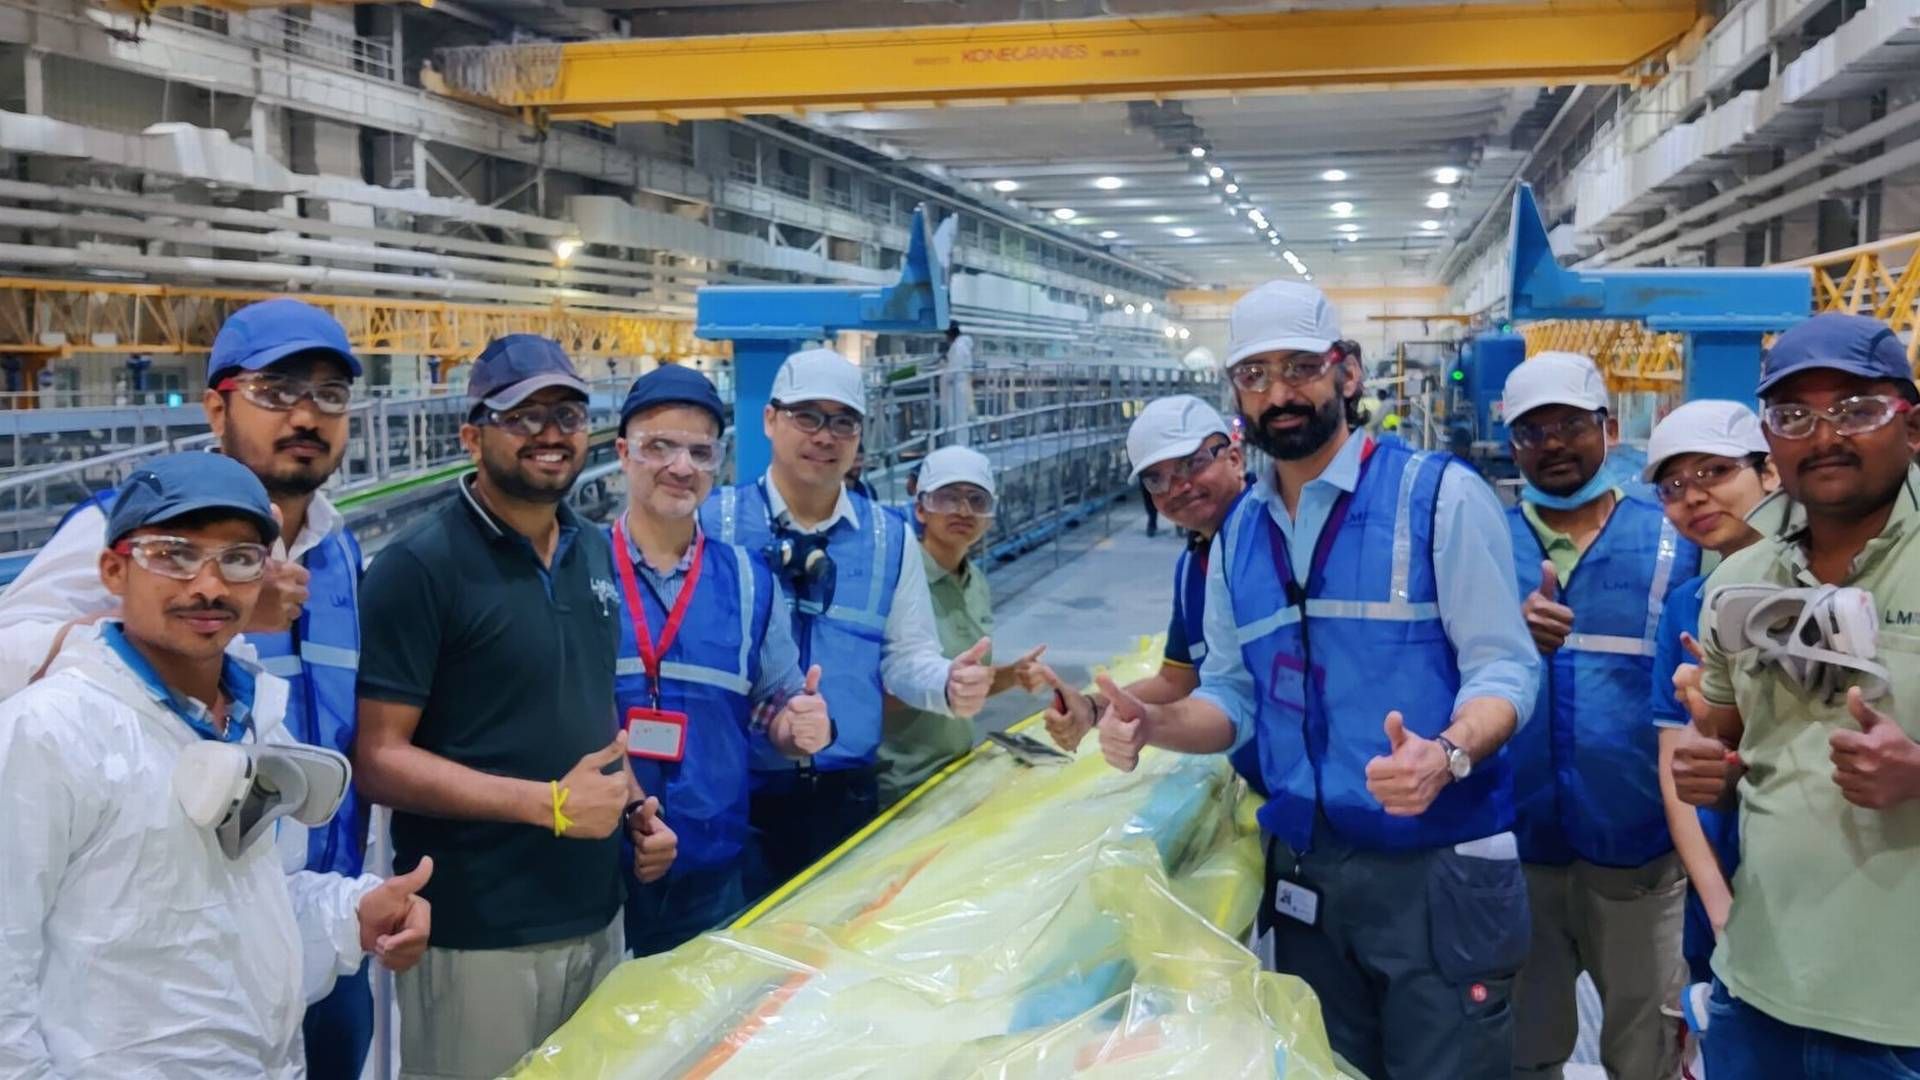 Hanif Mashal (fourth from the right), along with other members of LM's management team, toured a number of blade factories earlier this month. | Photo: Lm Wind Power